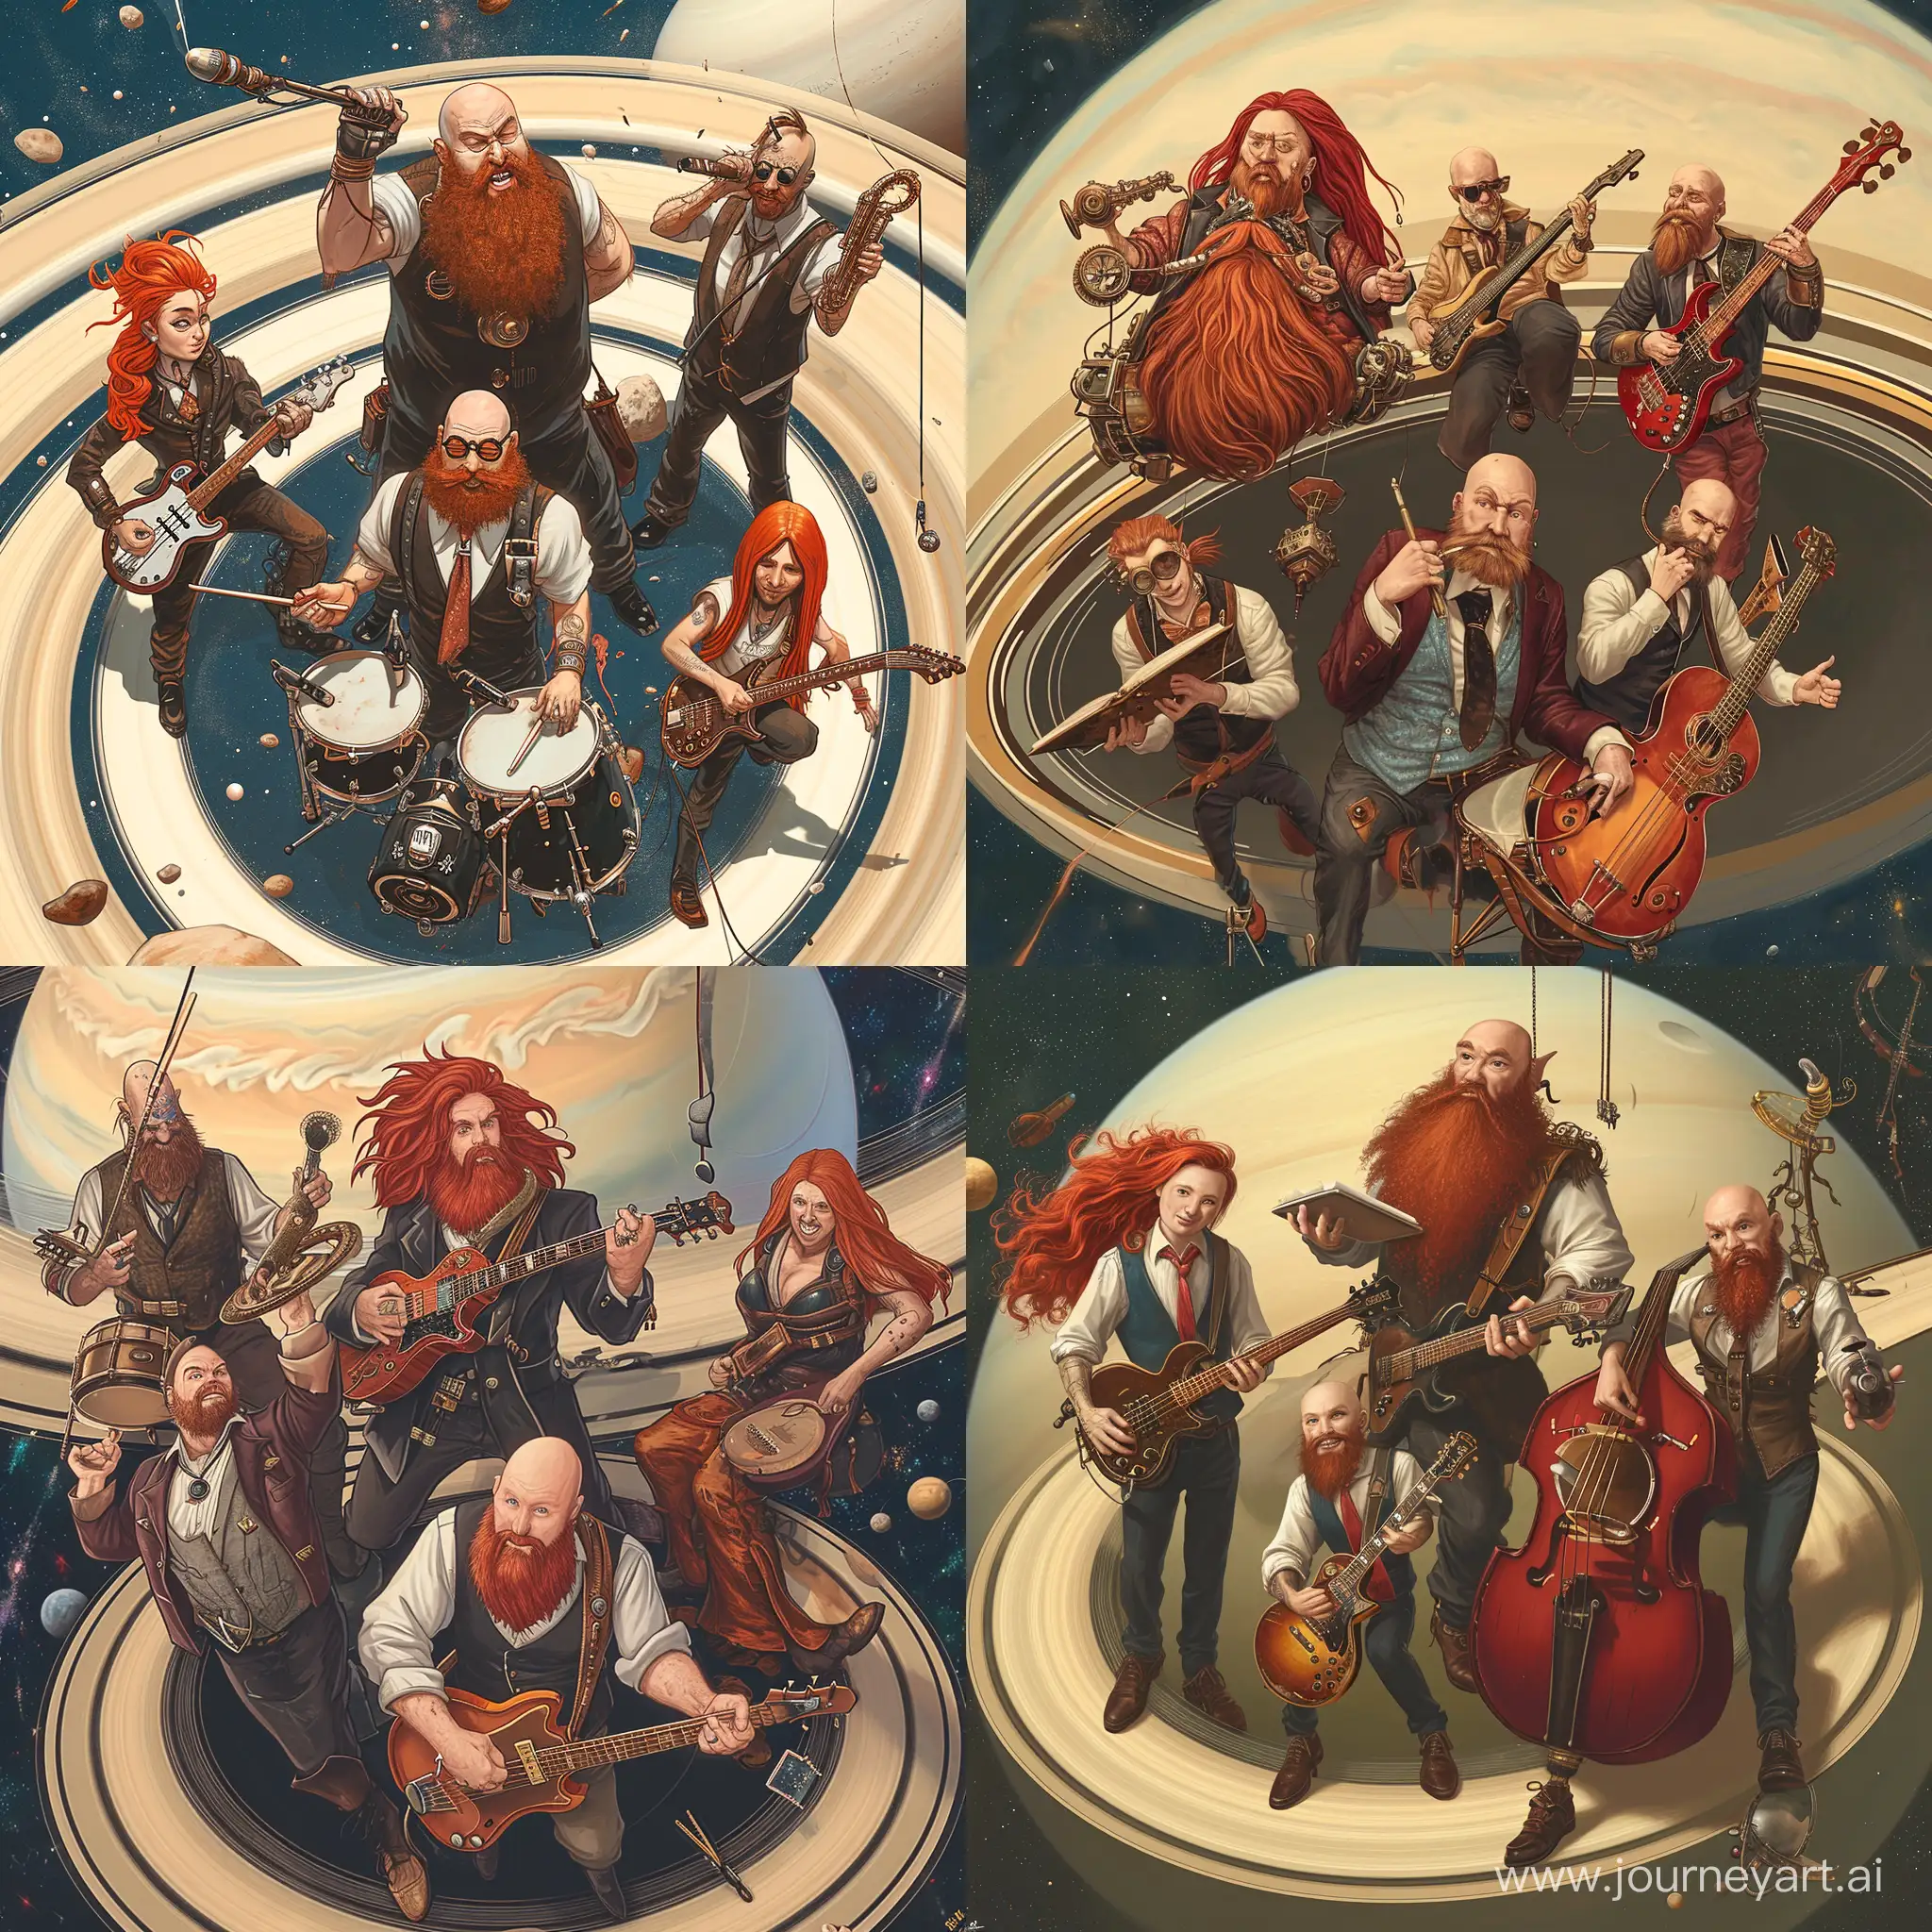 Promo picture of a stem punk space rock band consisting of 5 members: red headed guitarst and singer, very big bearderd bassist, bald guitarist, red longhaired drummer and a random guy with leather tie making notes. They can be standing on saturns rings in a space ship